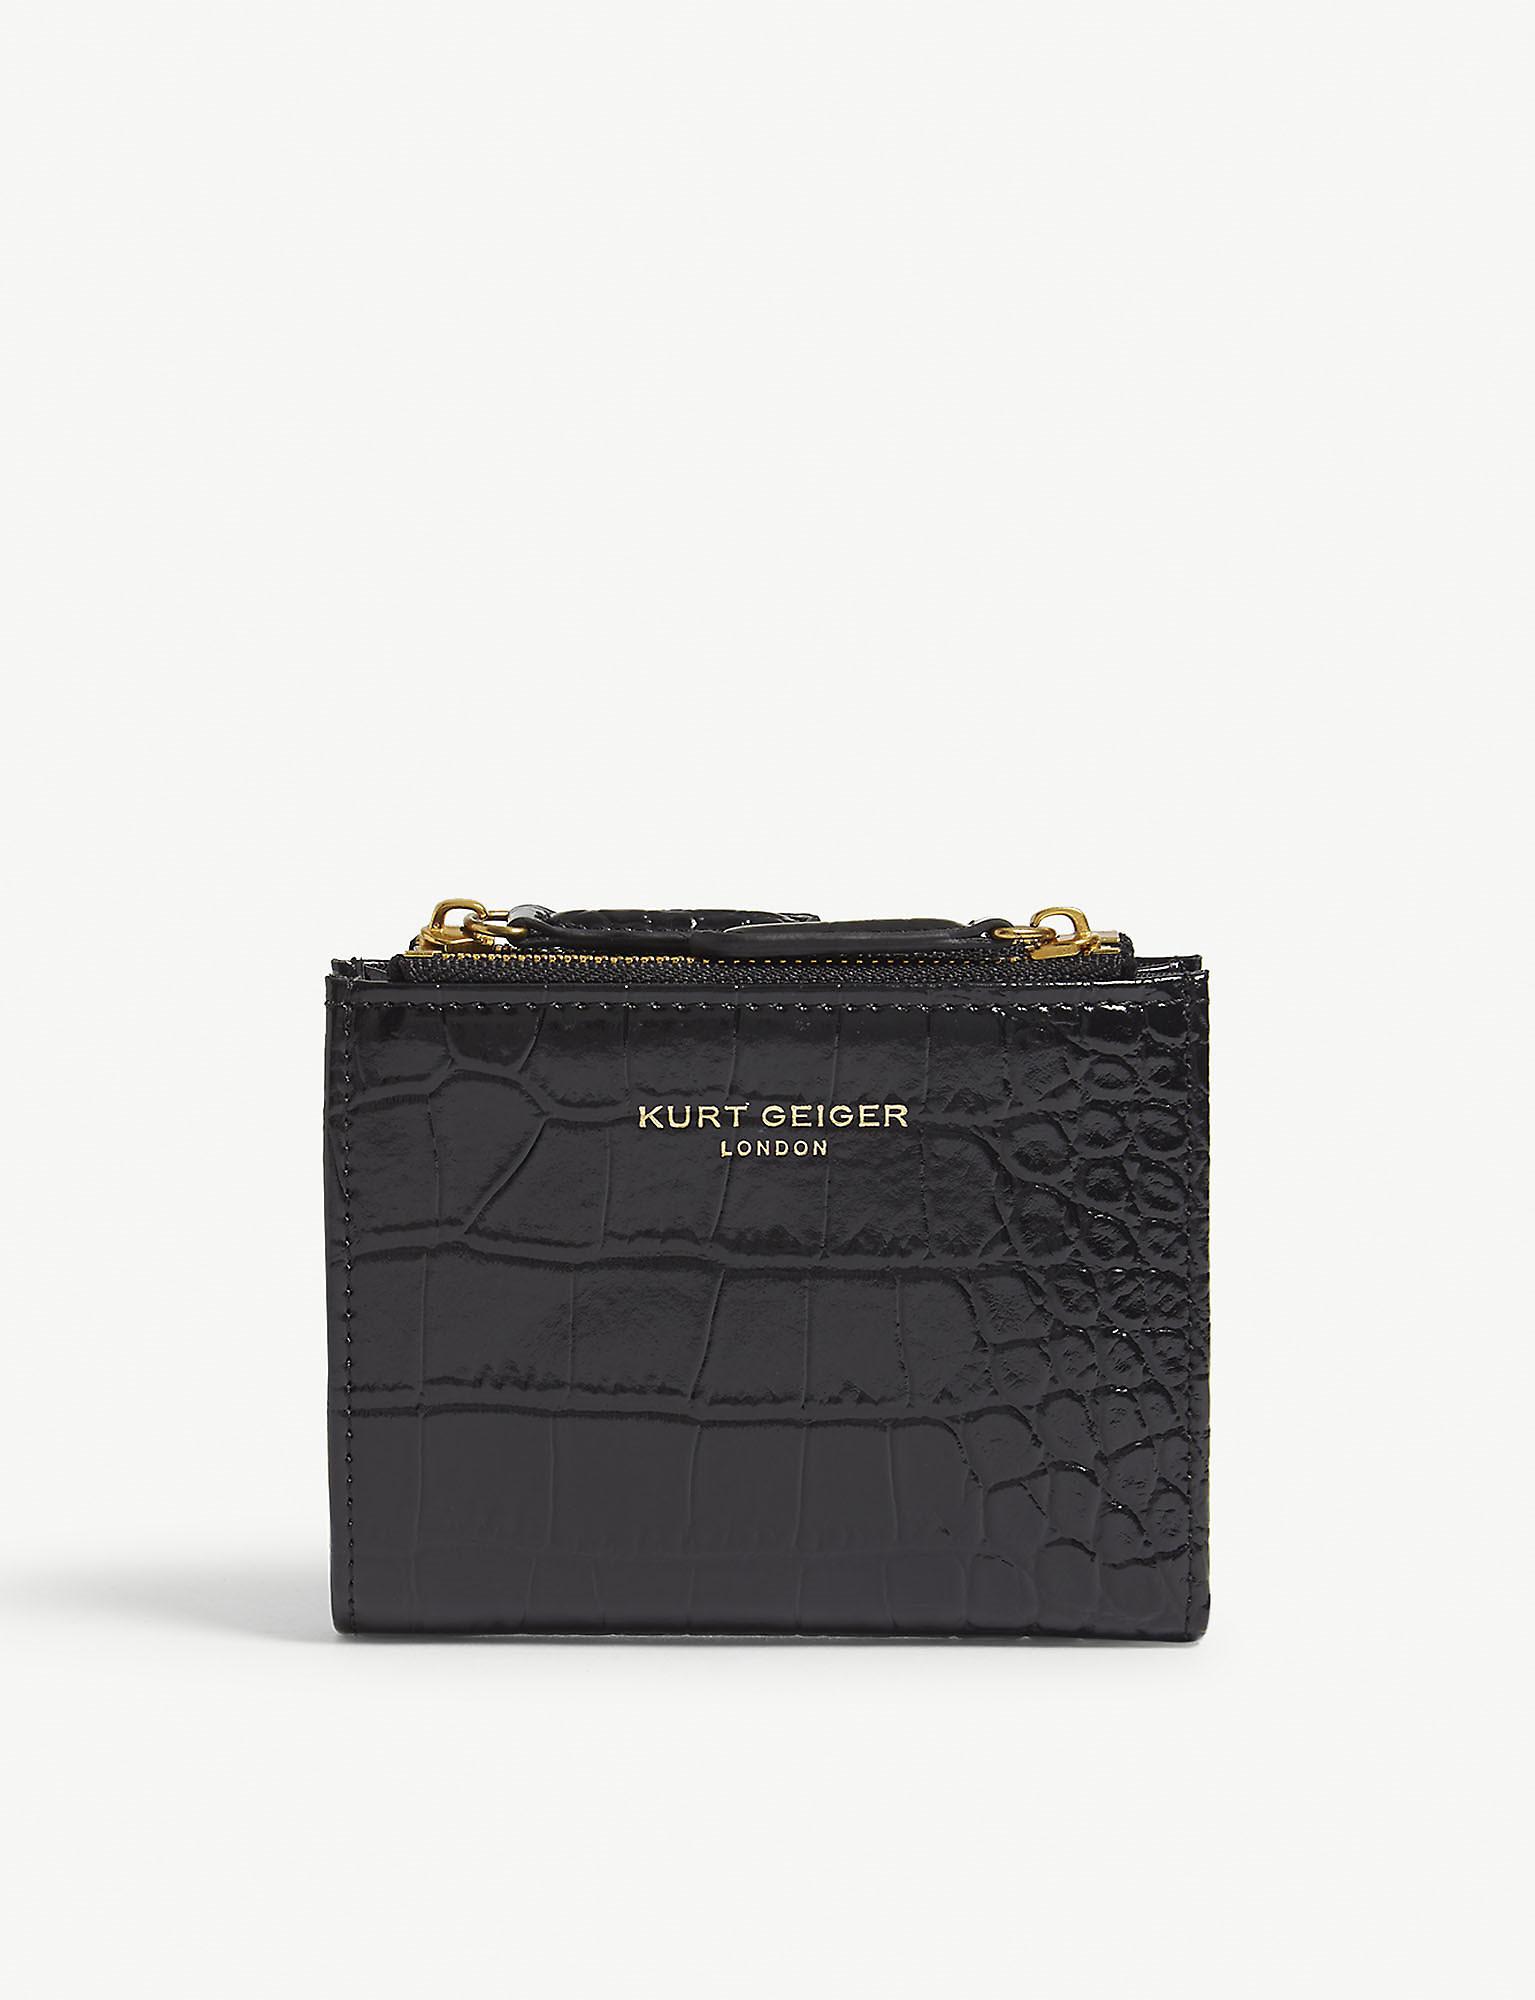 Kurt Geiger Croc-embossed Small Leather Purse in Black - Lyst